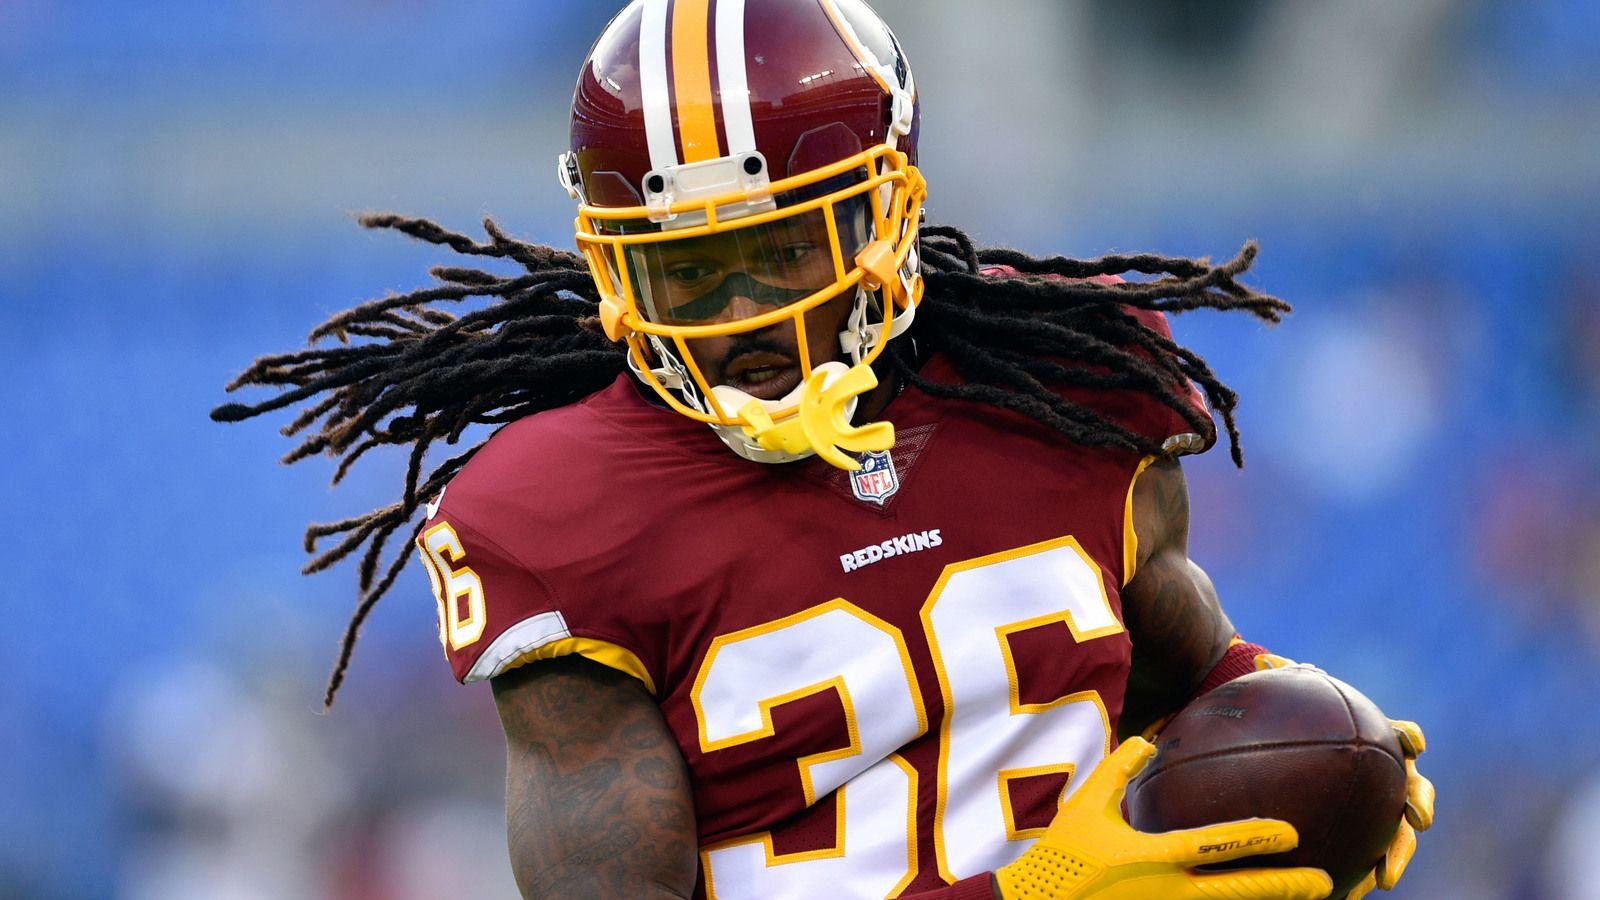 Redskins news: DJ Swearinger says they didn't play the full game